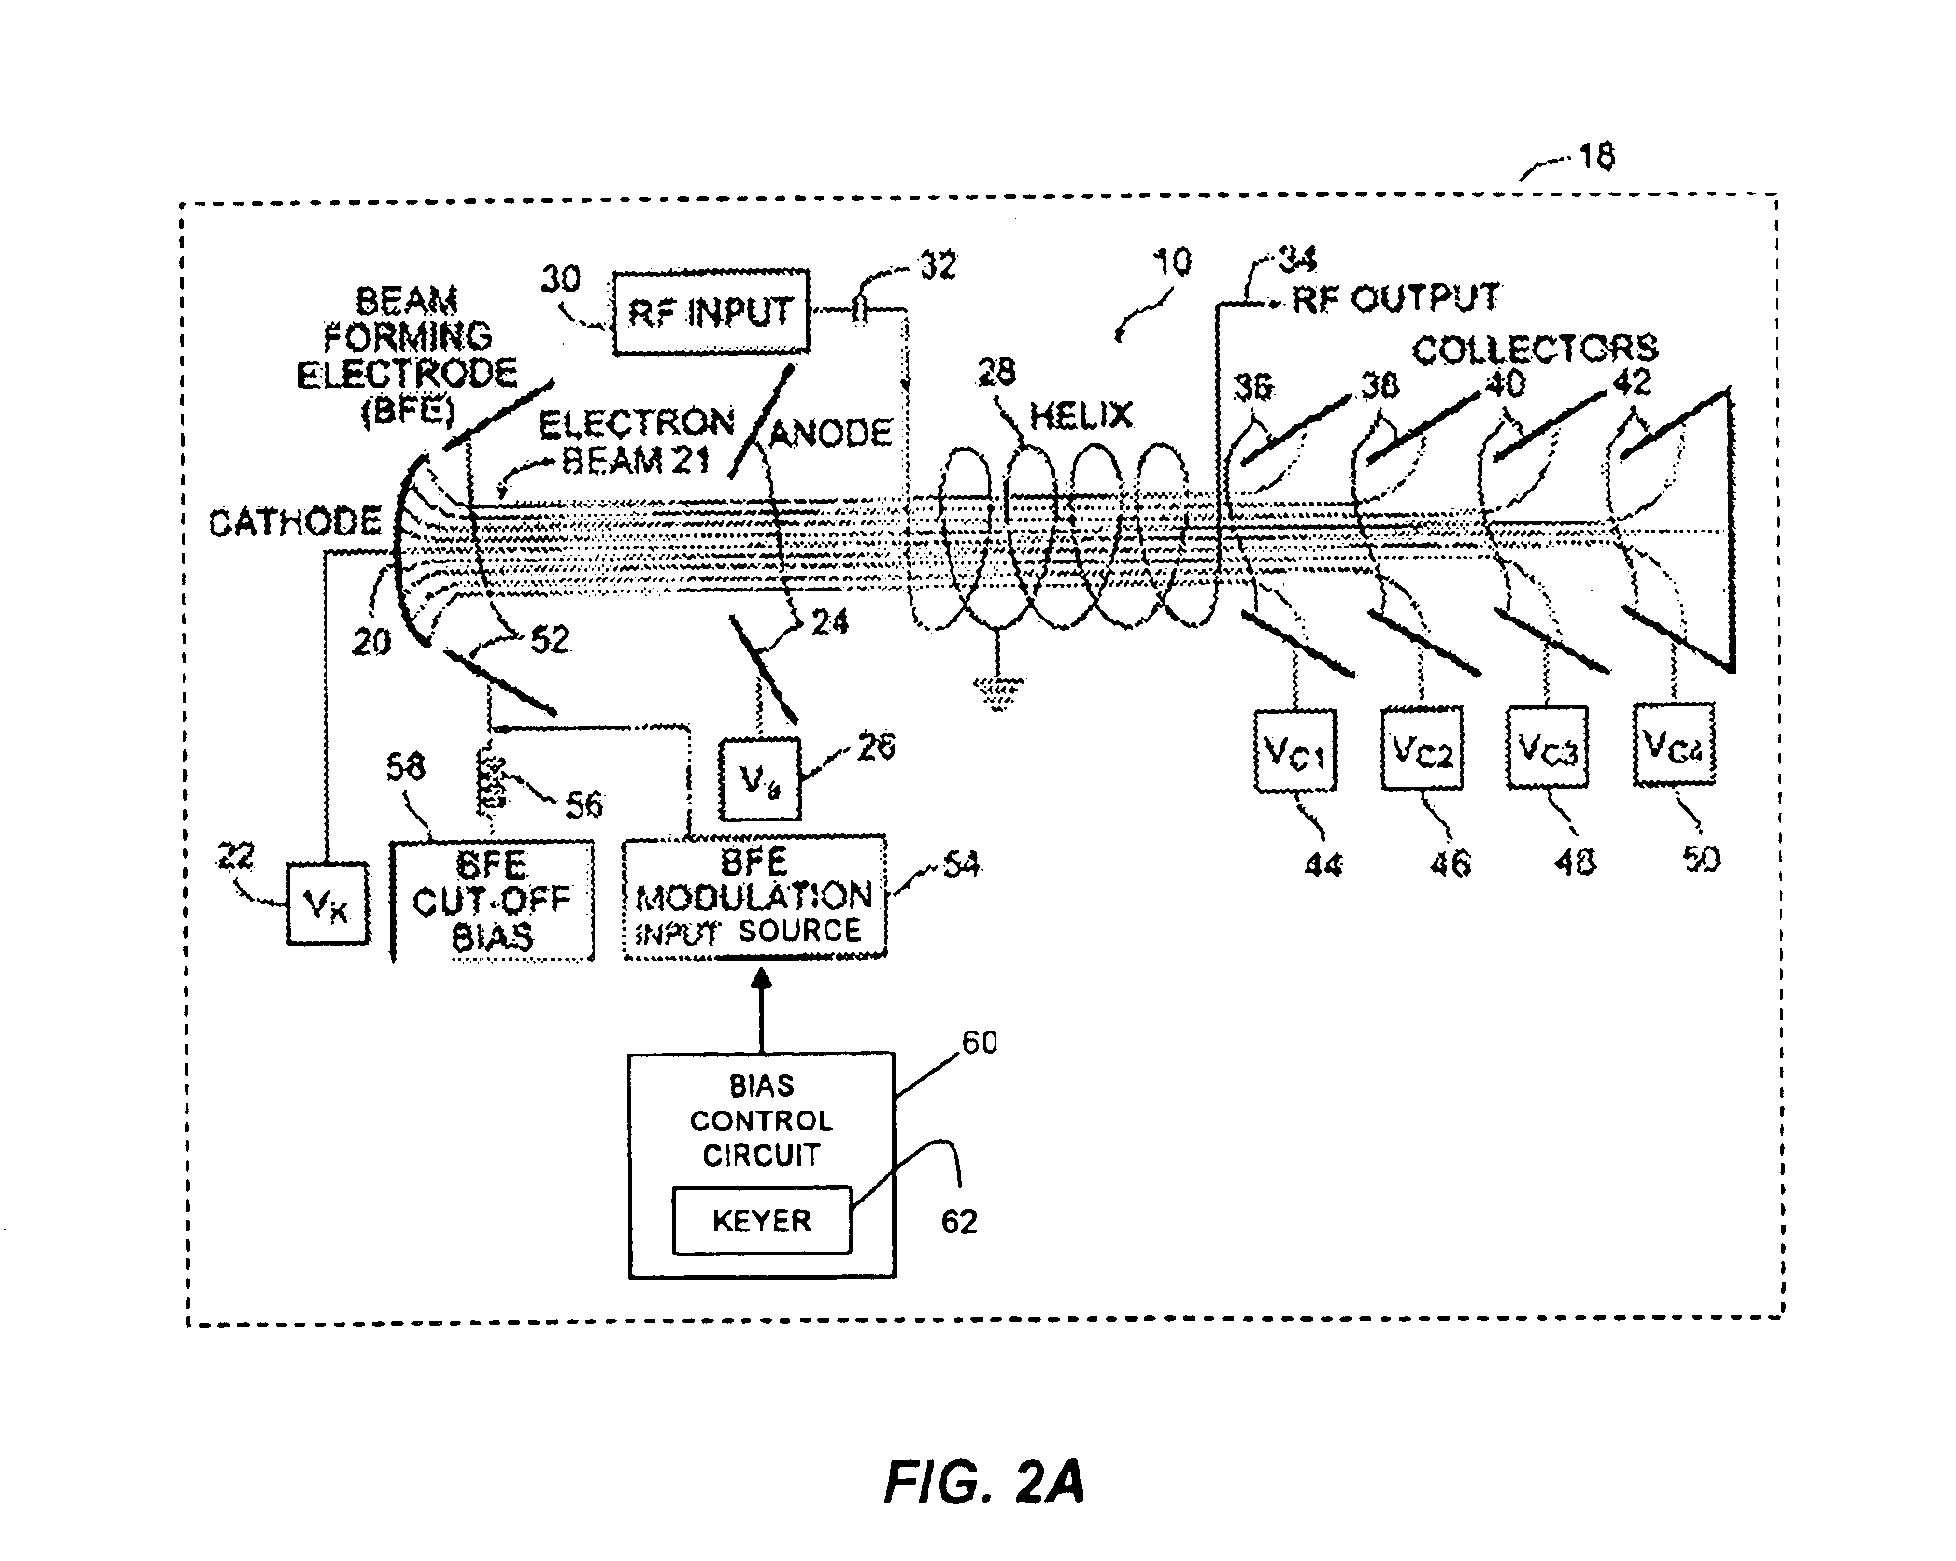 Power regulator for intermittent use of traveling wave tube amplifiers in communications satellites